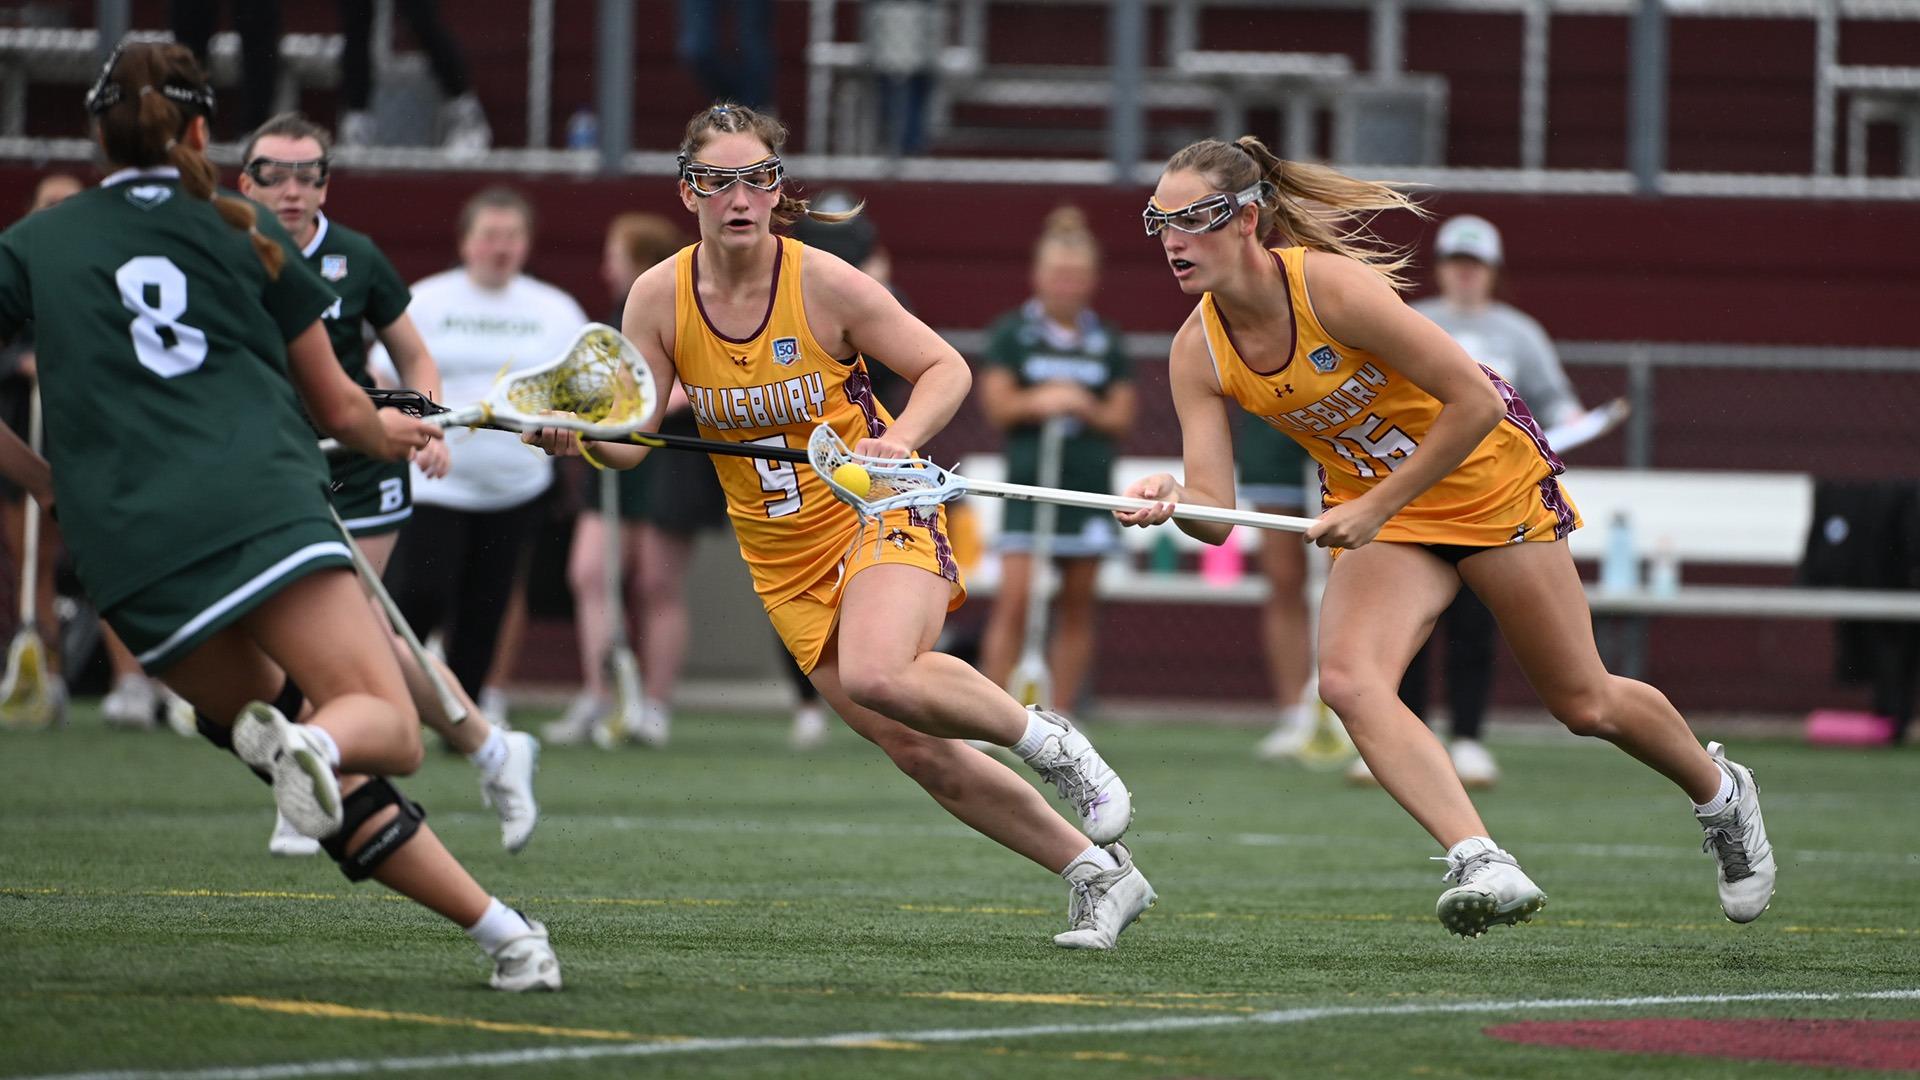 No. 5 Salisbury moves into NCAA quarters; holds off No. 15 Babson, 15-10